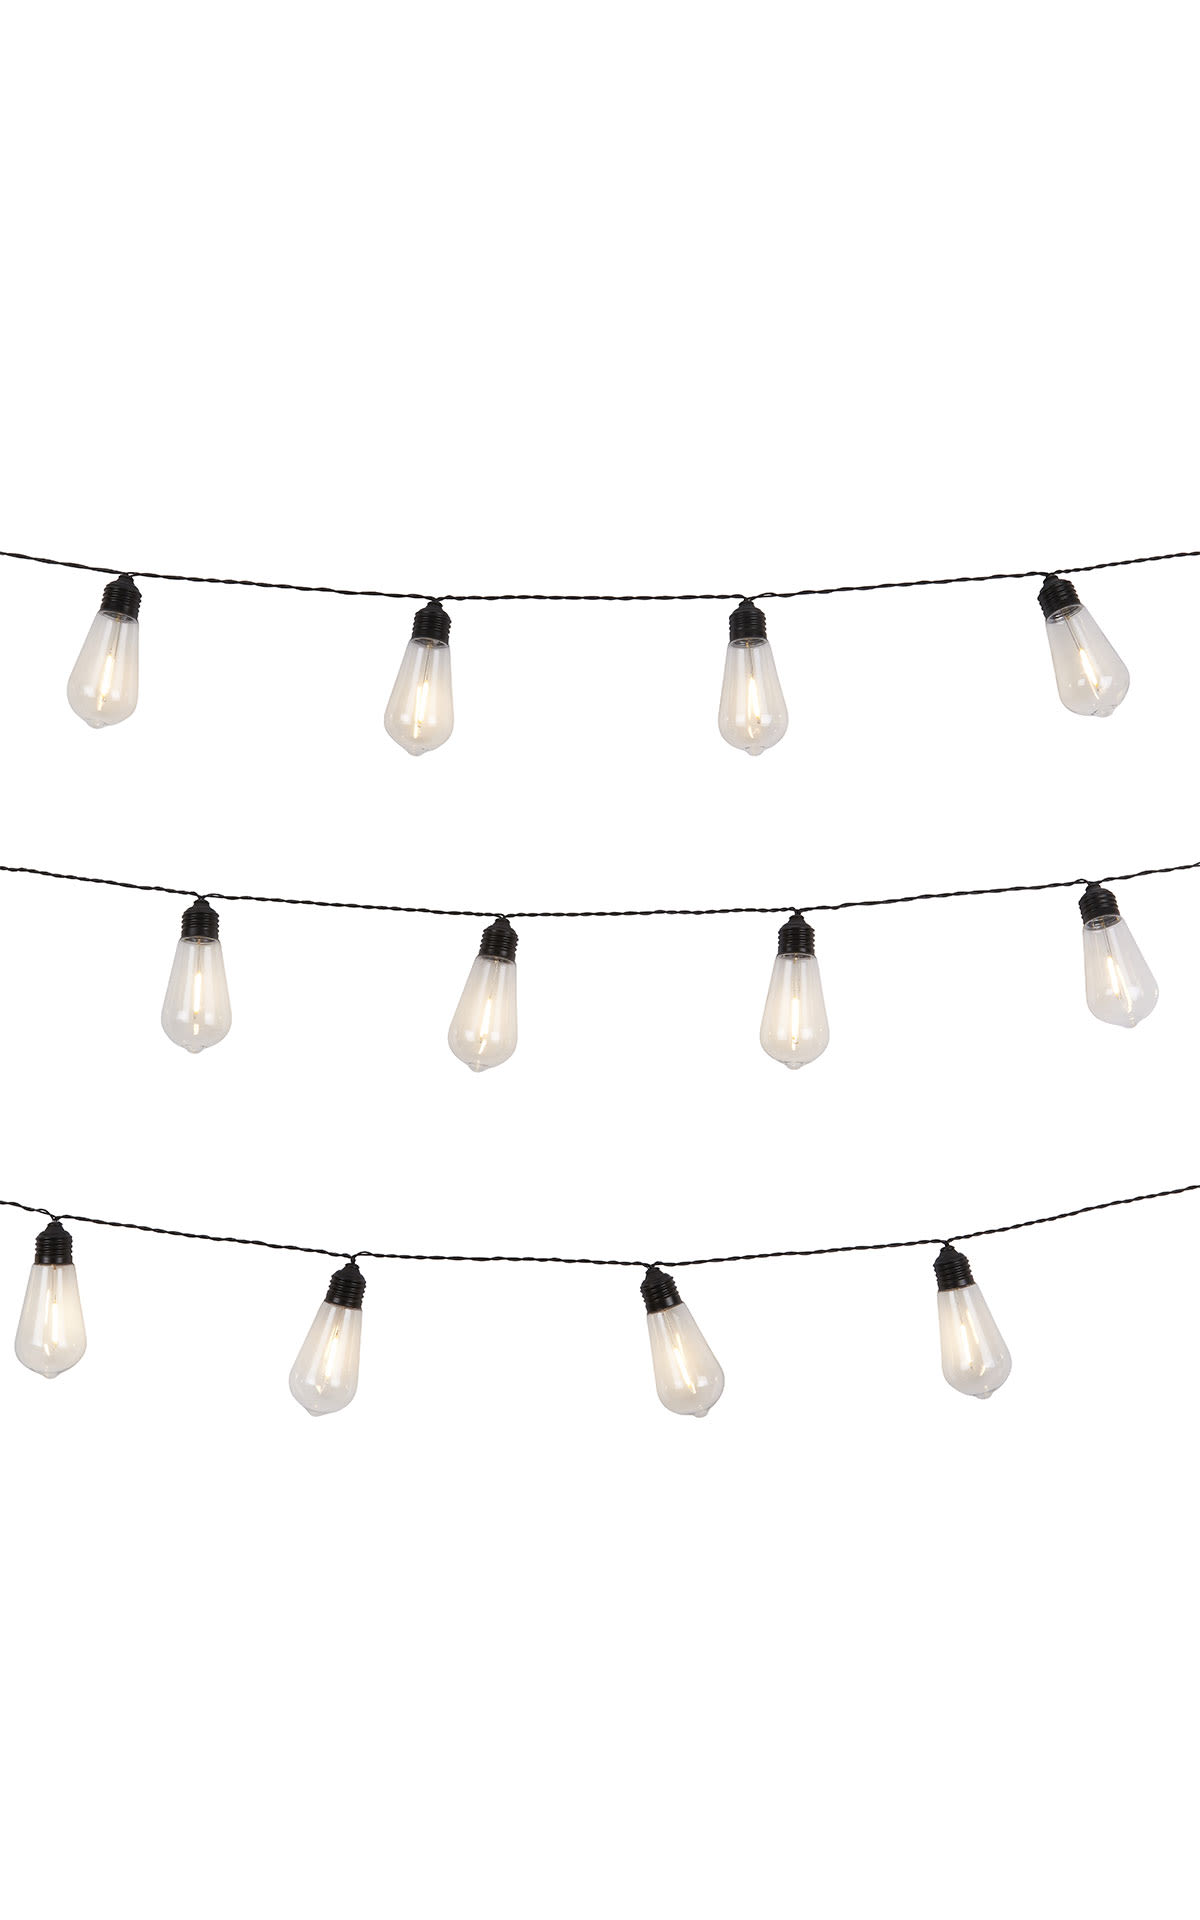 The White Company Bistro indoor/outdoor lights from Bicester Village